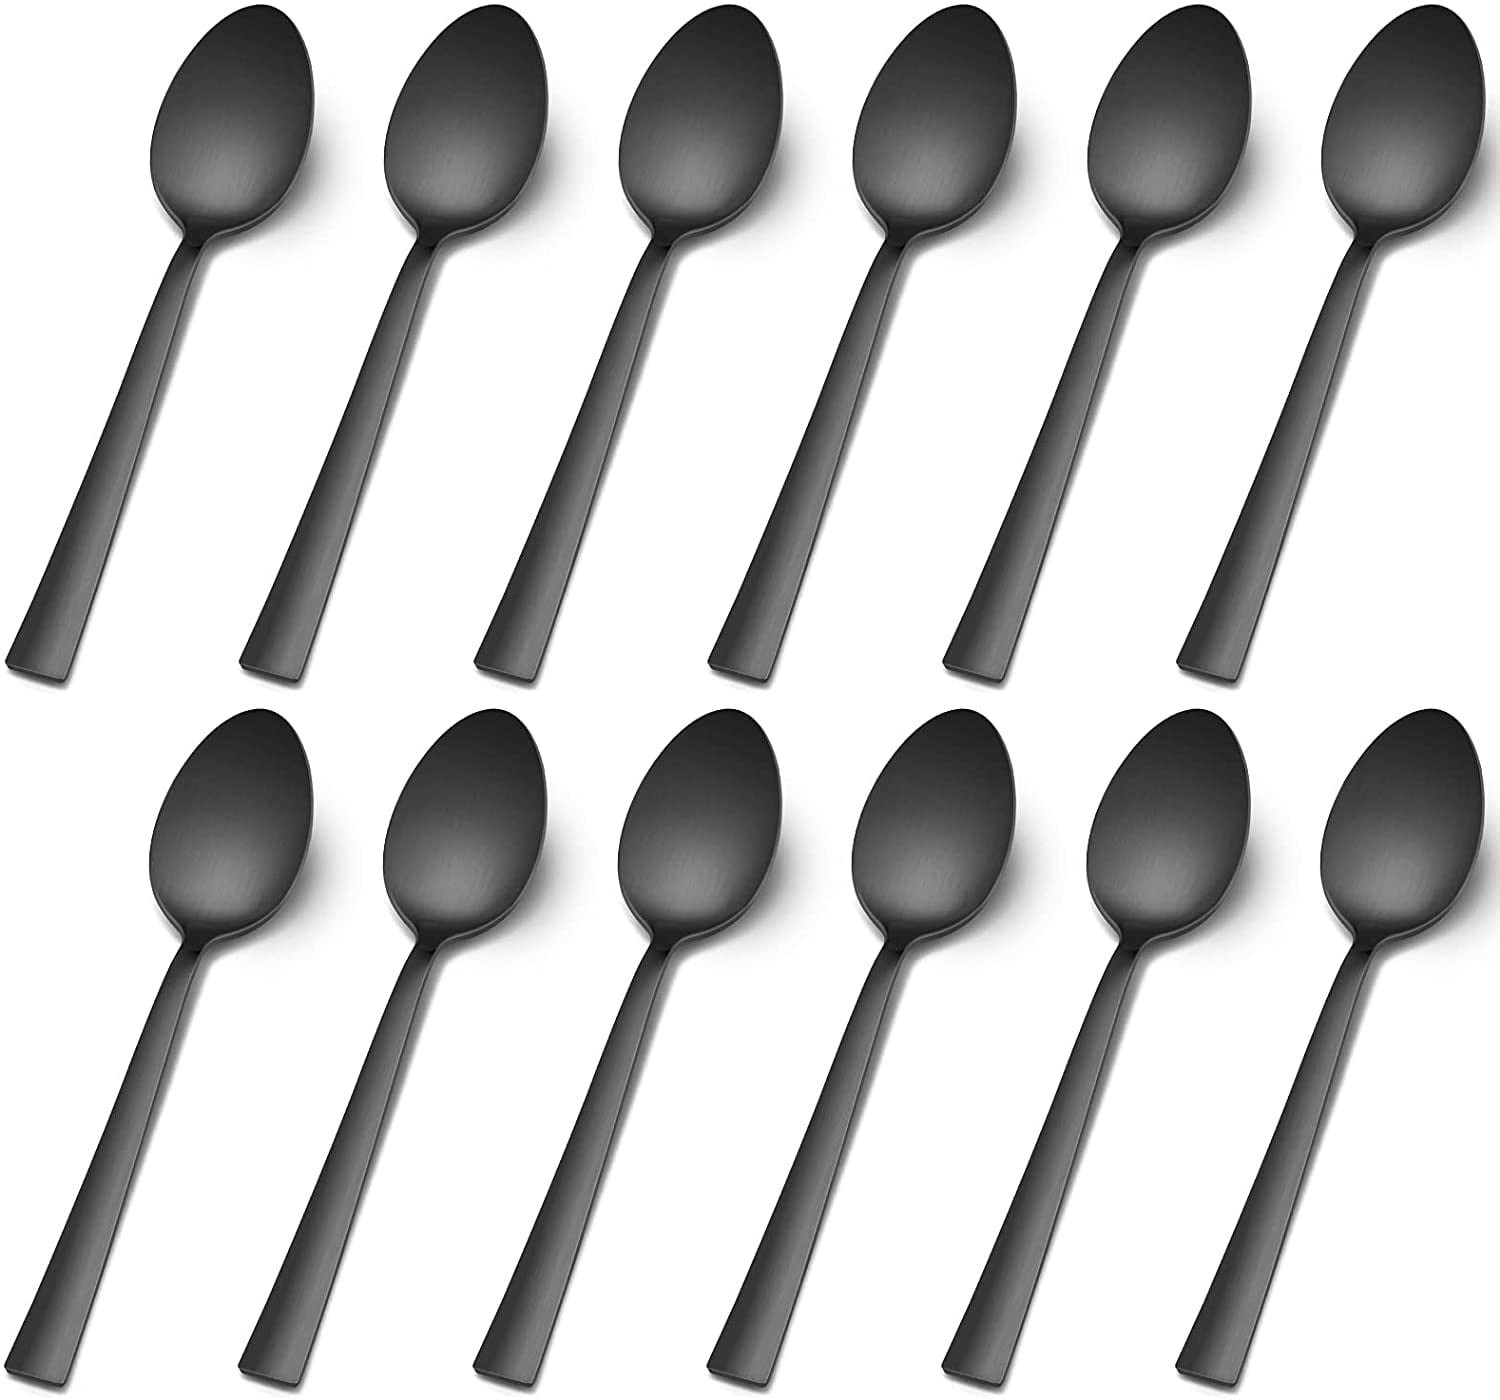 Scalloped Edge & Dishwasher Safe Kitchen or Restaurant E-far 7.9 Inch Stainless Steel Soup Spoons Tablespoons for Home Non-toxic & Mirror Polished Dinner Spoons Set of 12 